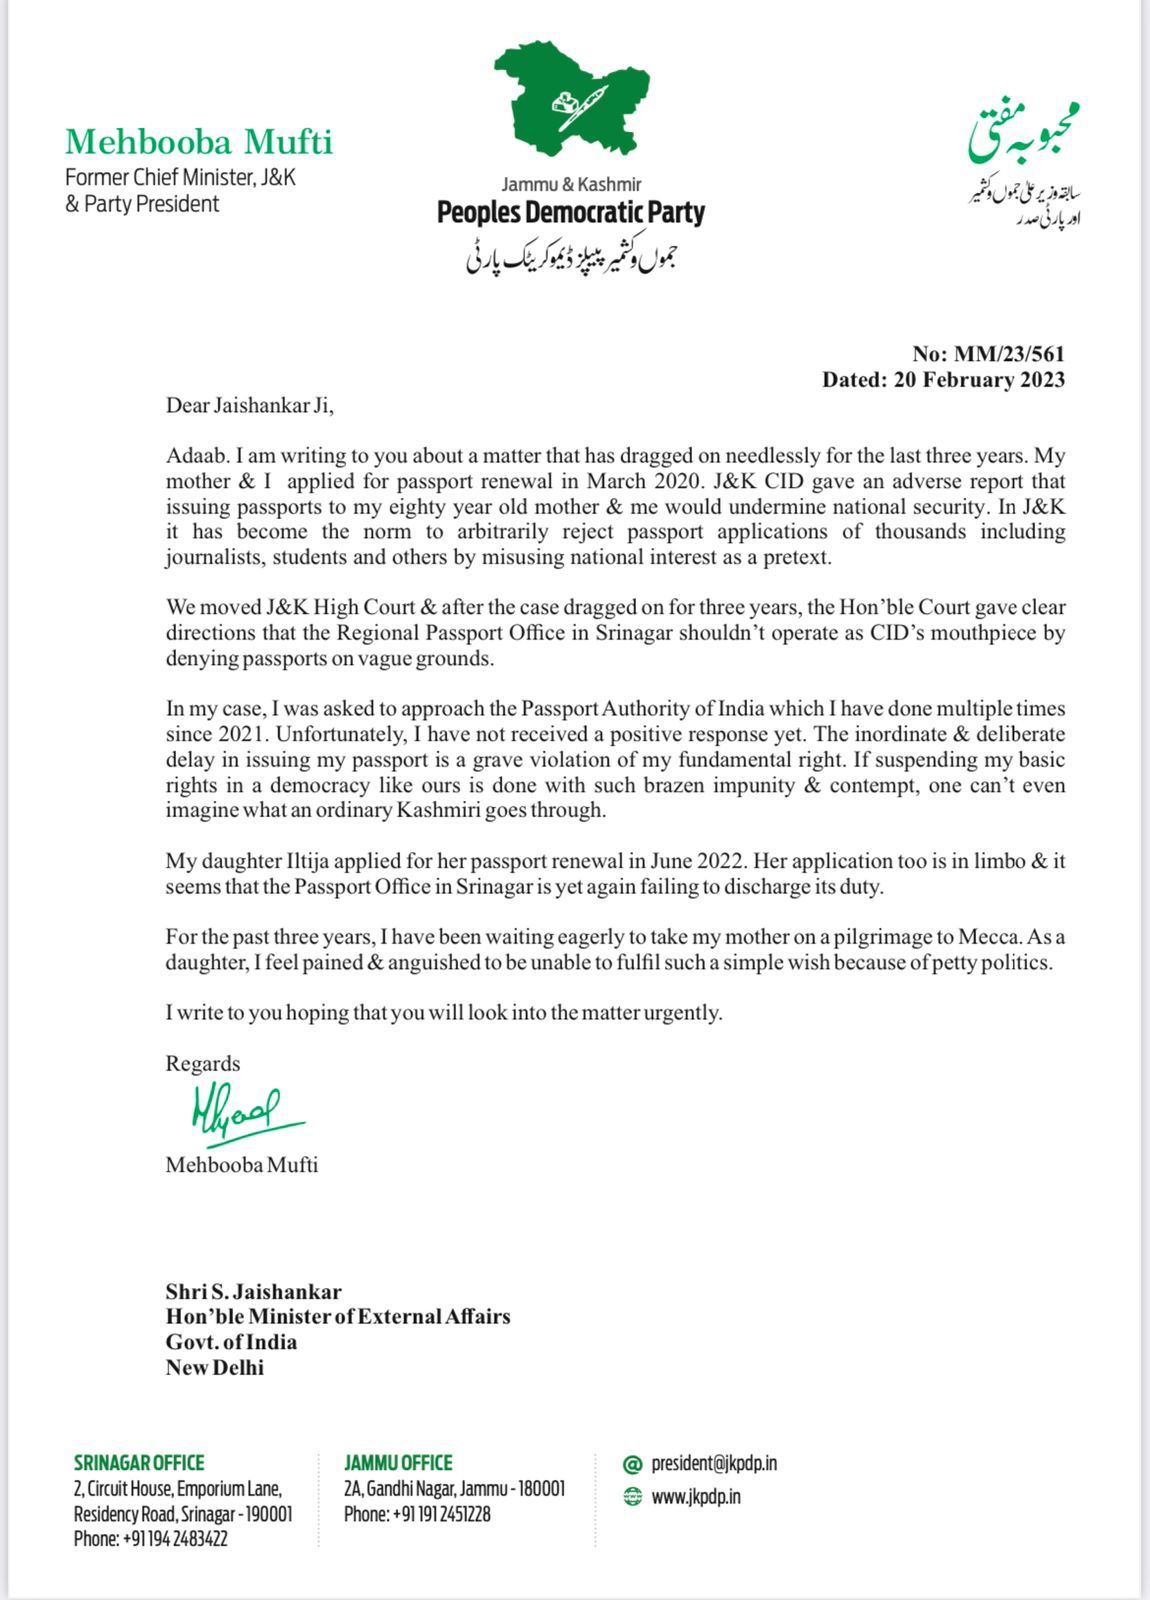 Mehbooba Mufti wrote a letter to Foreign Minister regarding passports of Mother and daughter